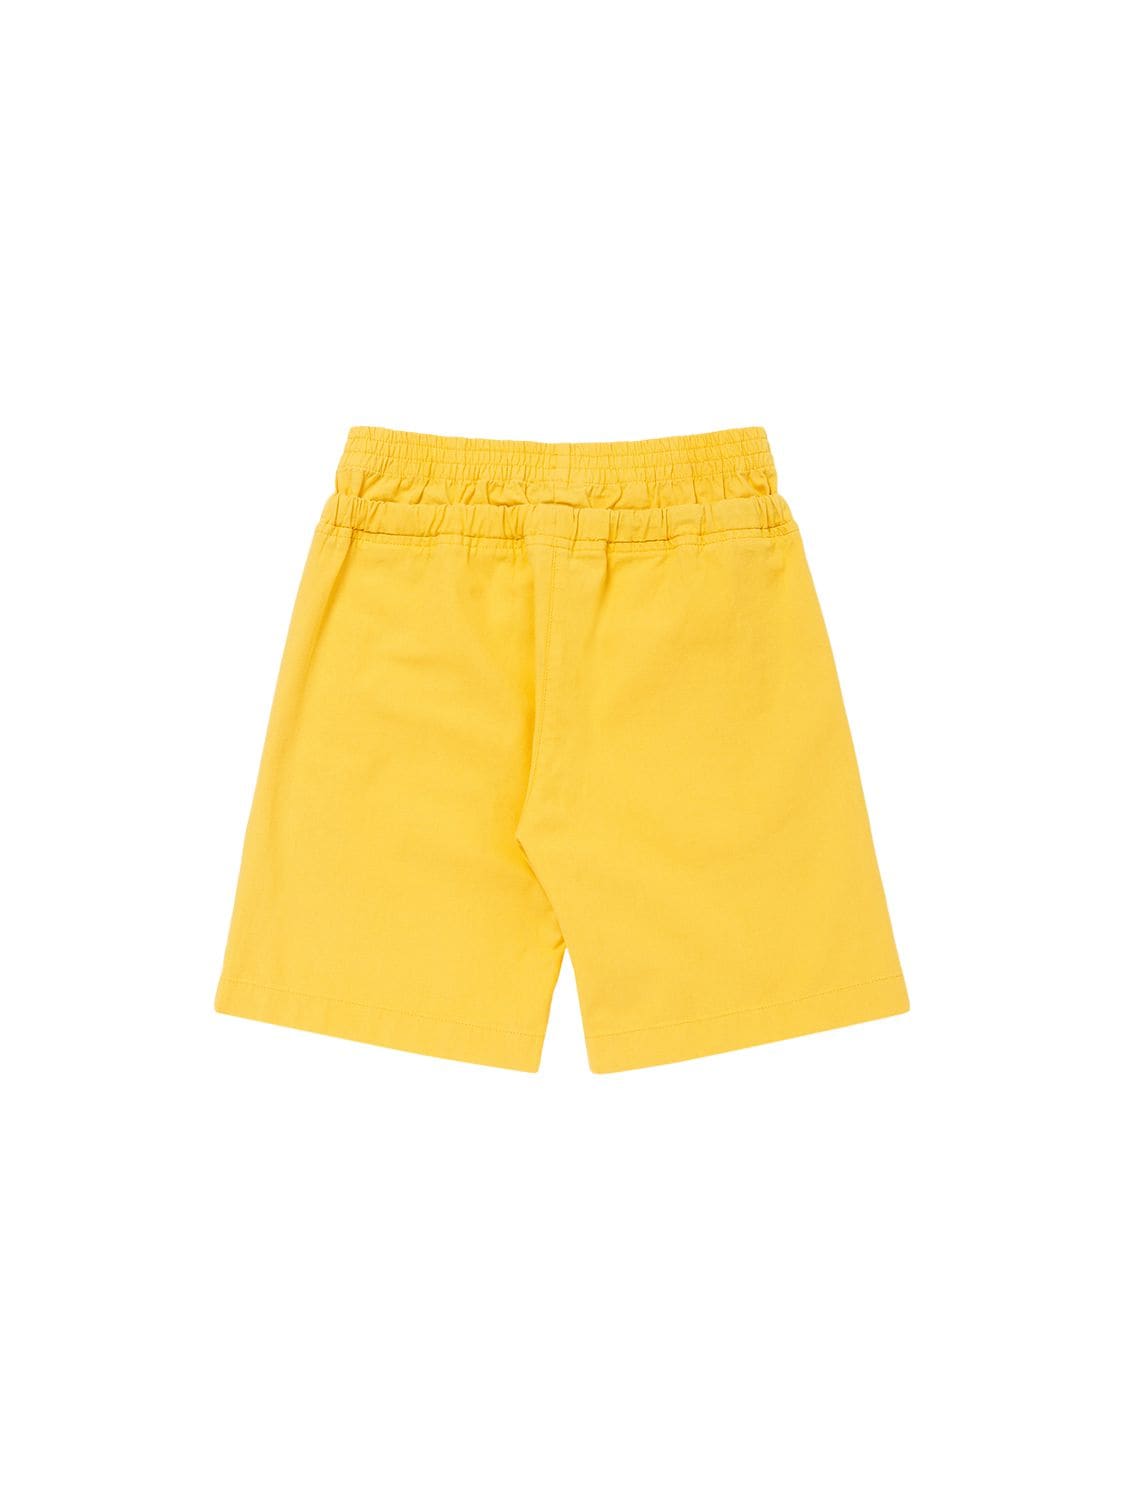 Shop N°21 Cotton Shorts In Yellow